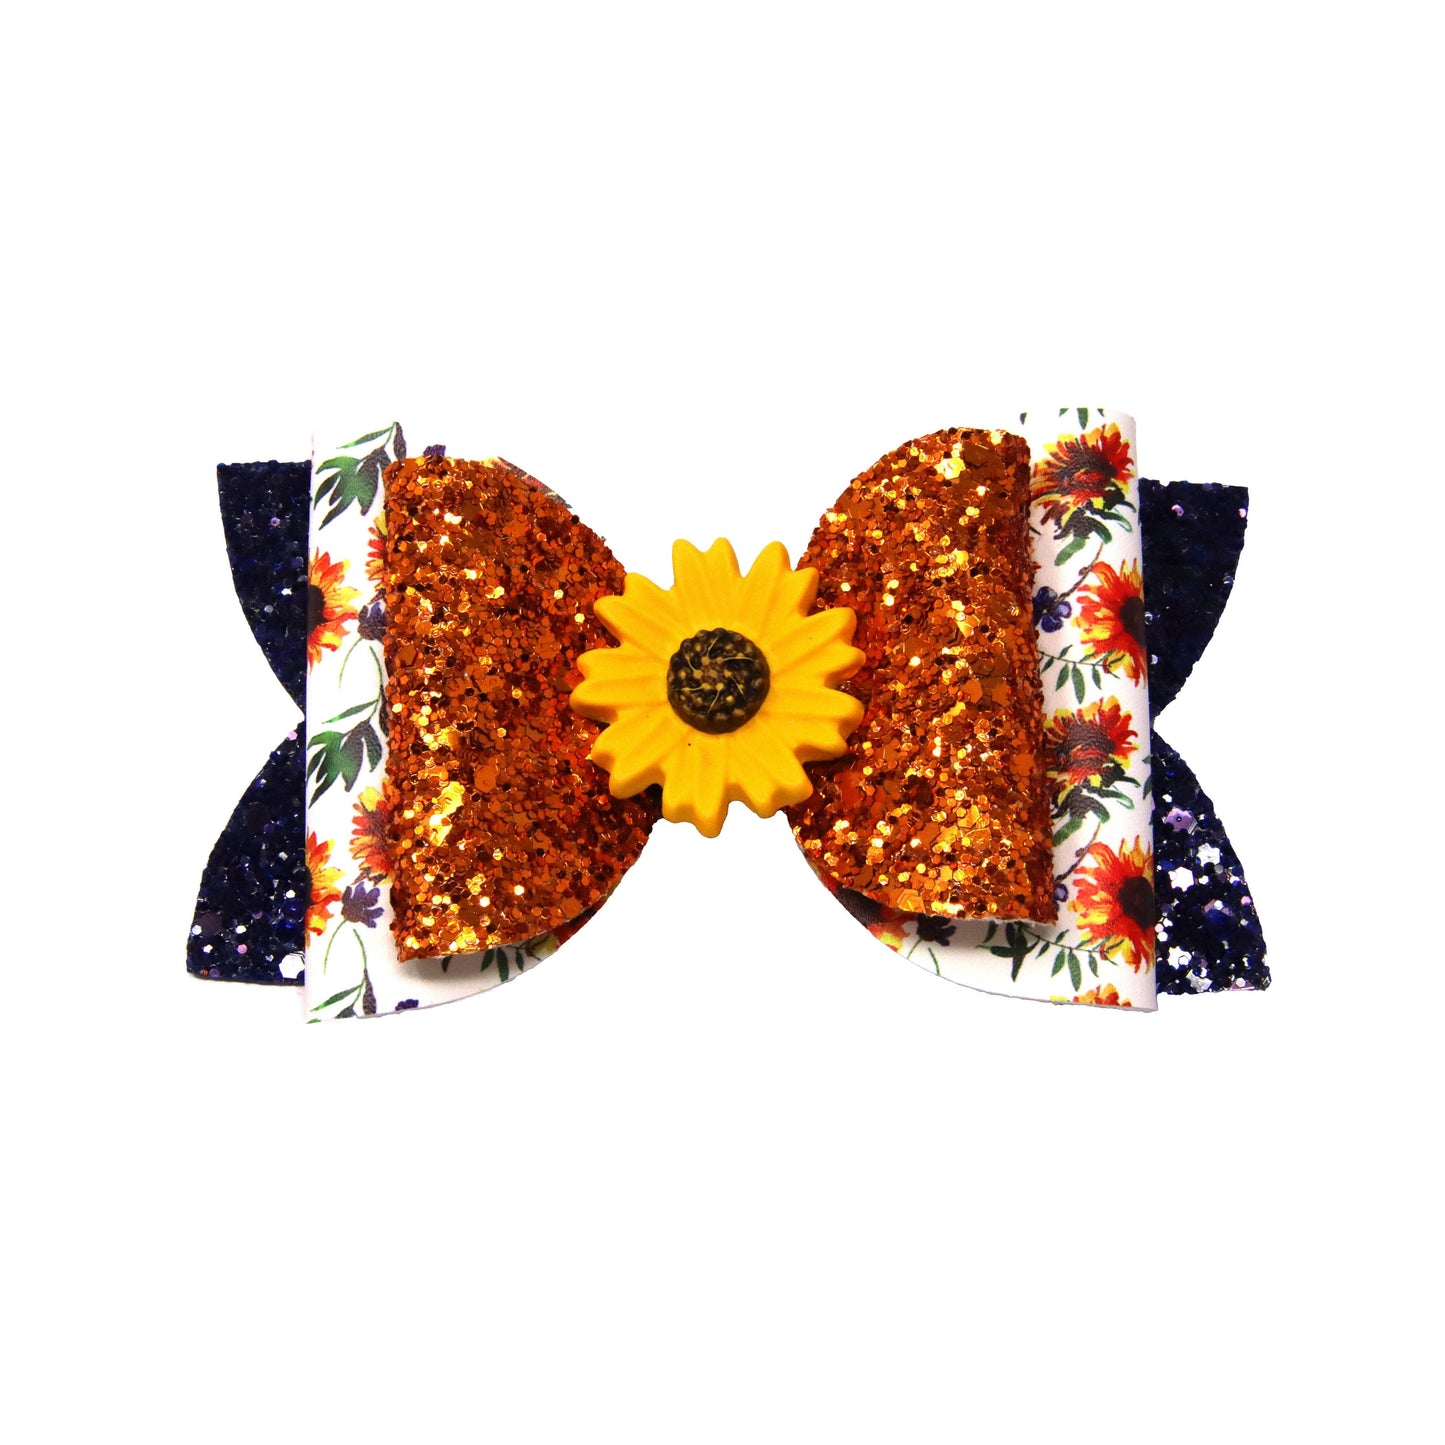 5 inch Sweet Sunflowers Double Diva Bow with Sunflower Clay